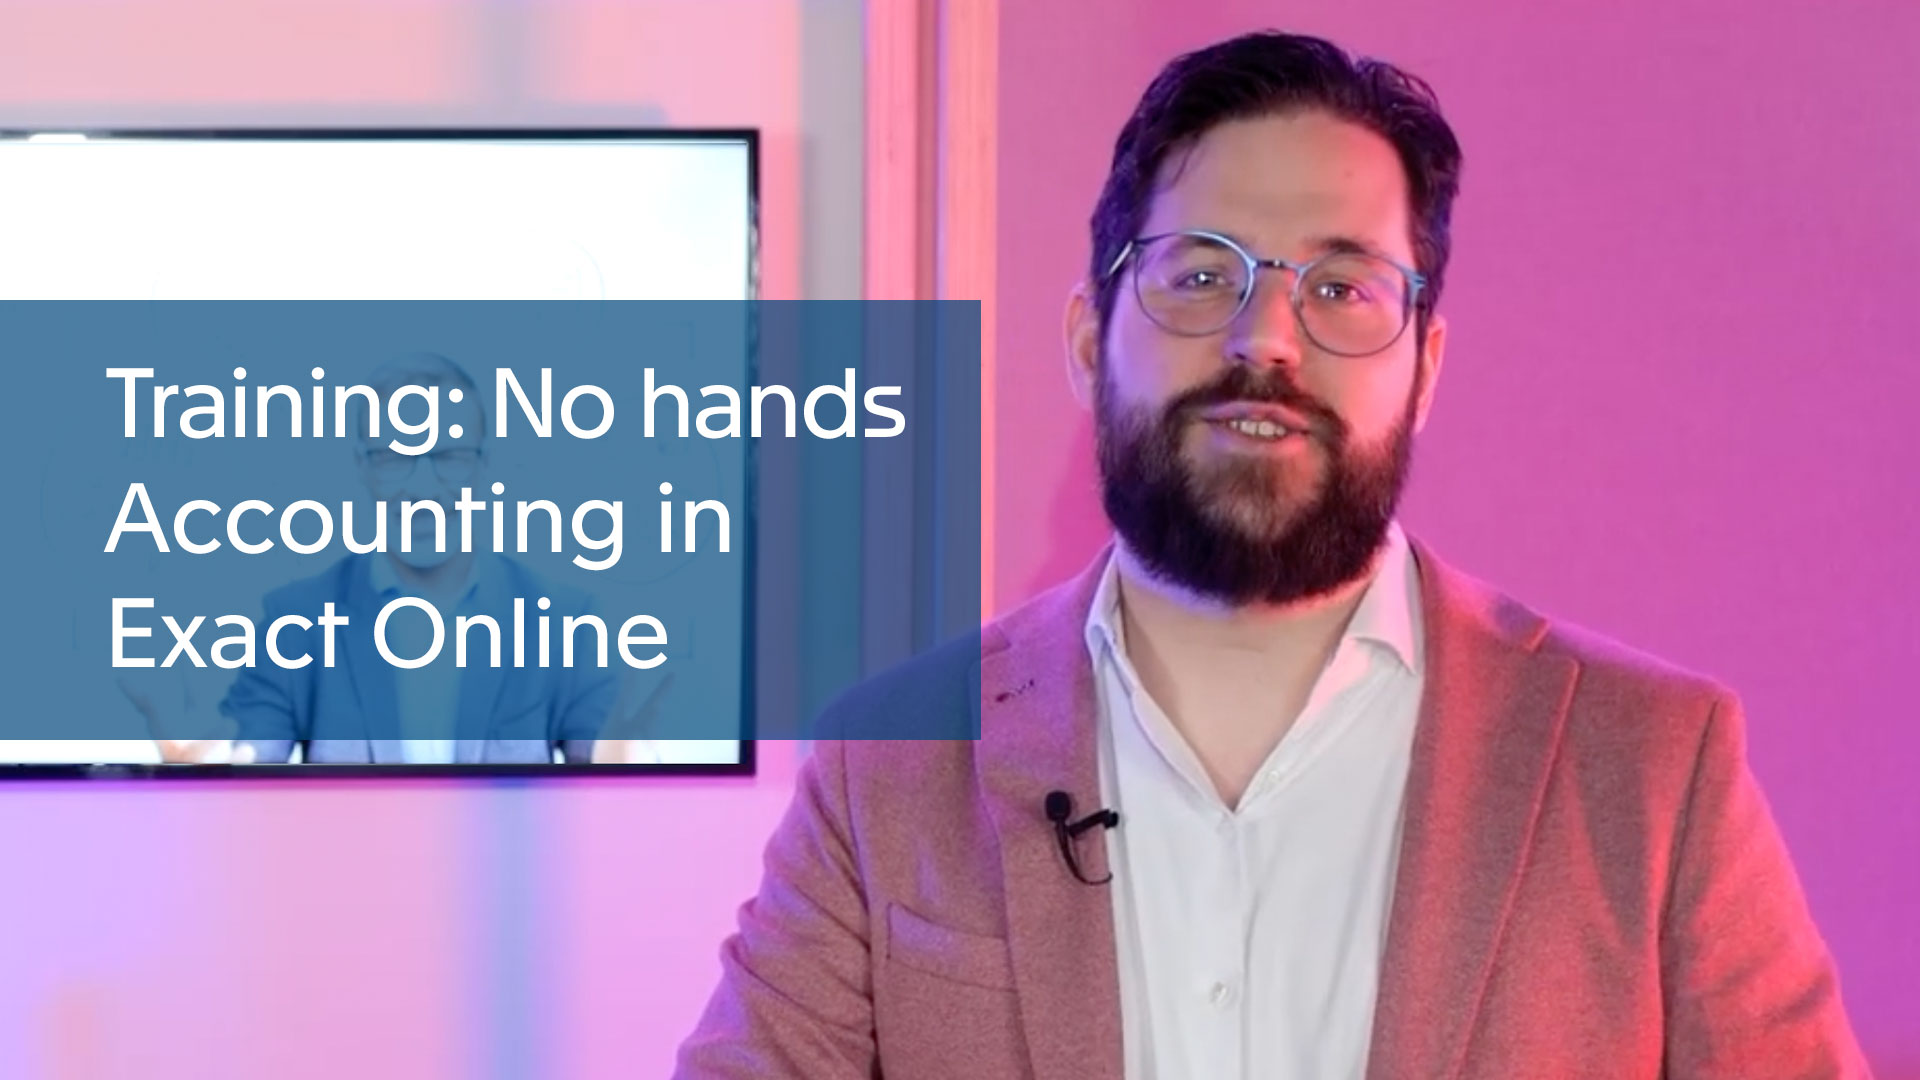 Training: No hands Accounting in Exact Online